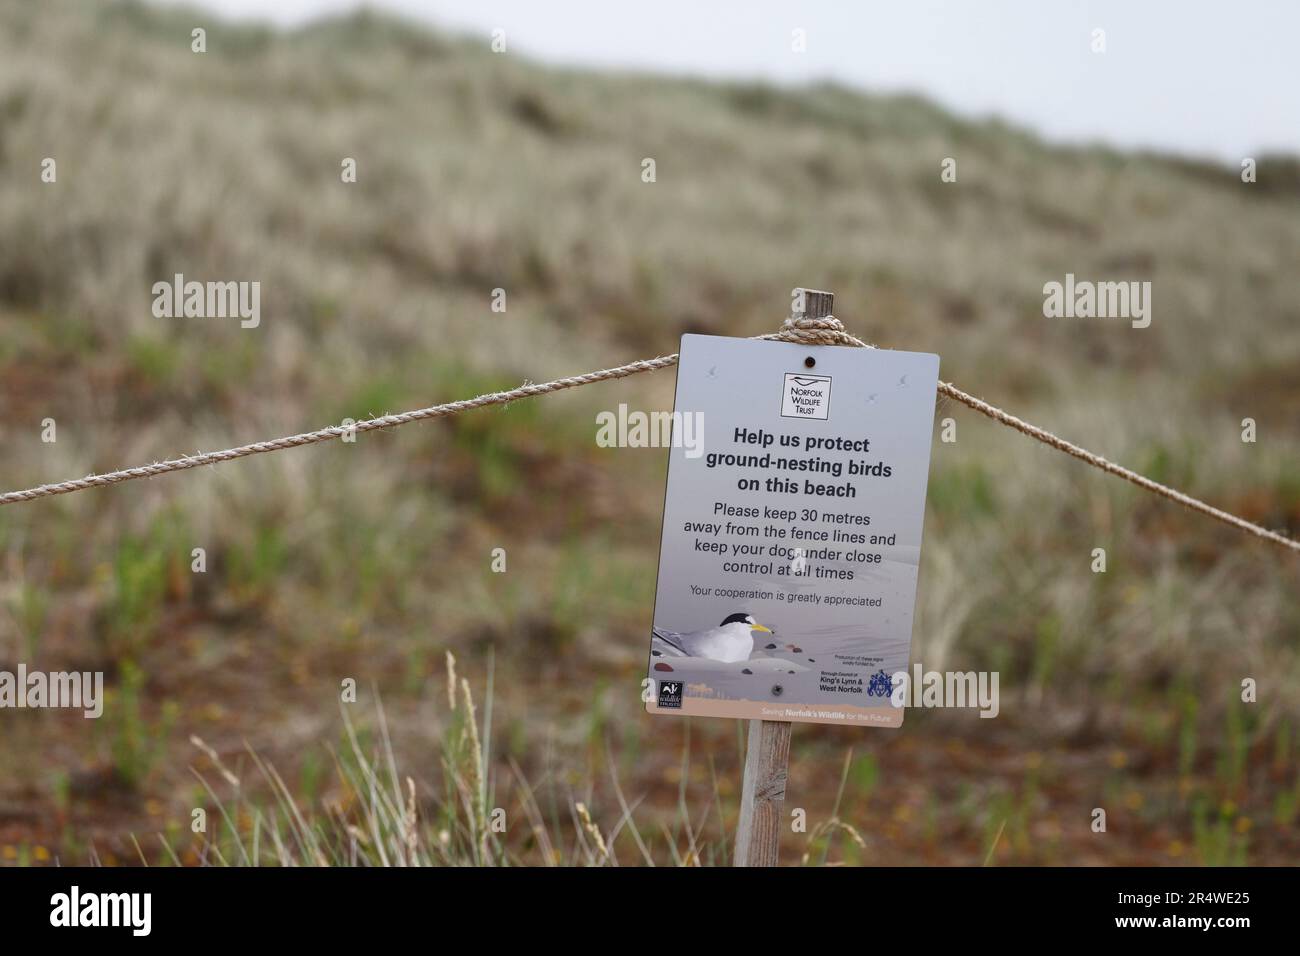 Warning sign on a dune area to protect nesting birds. Stock Photo